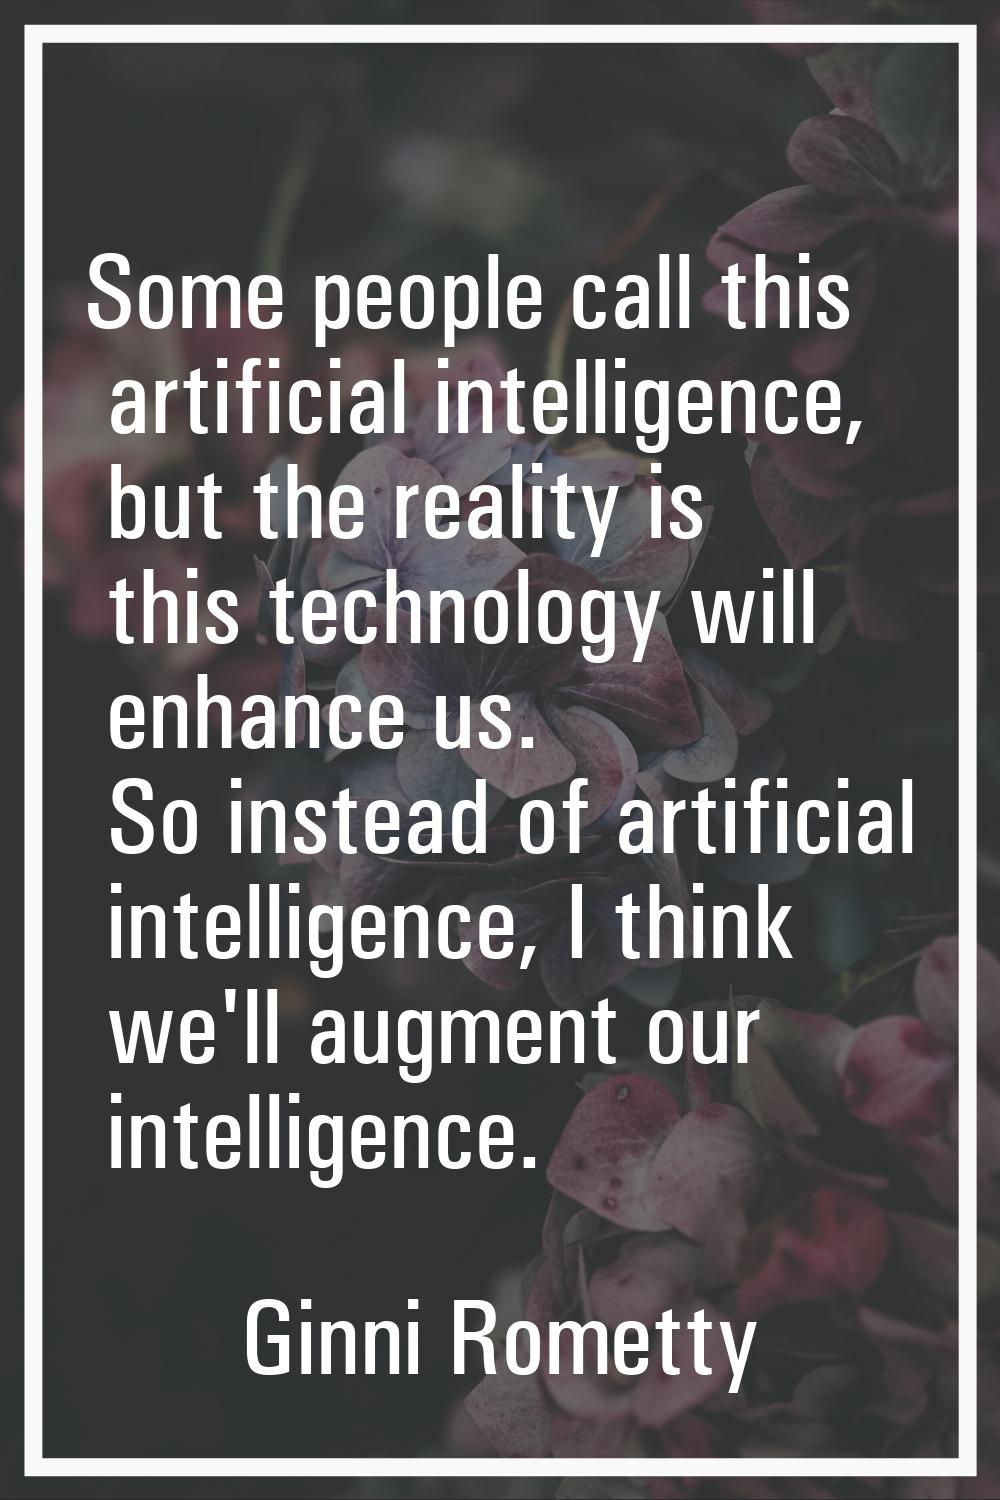 Some people call this artificial intelligence, but the reality is this technology will enhance us. 